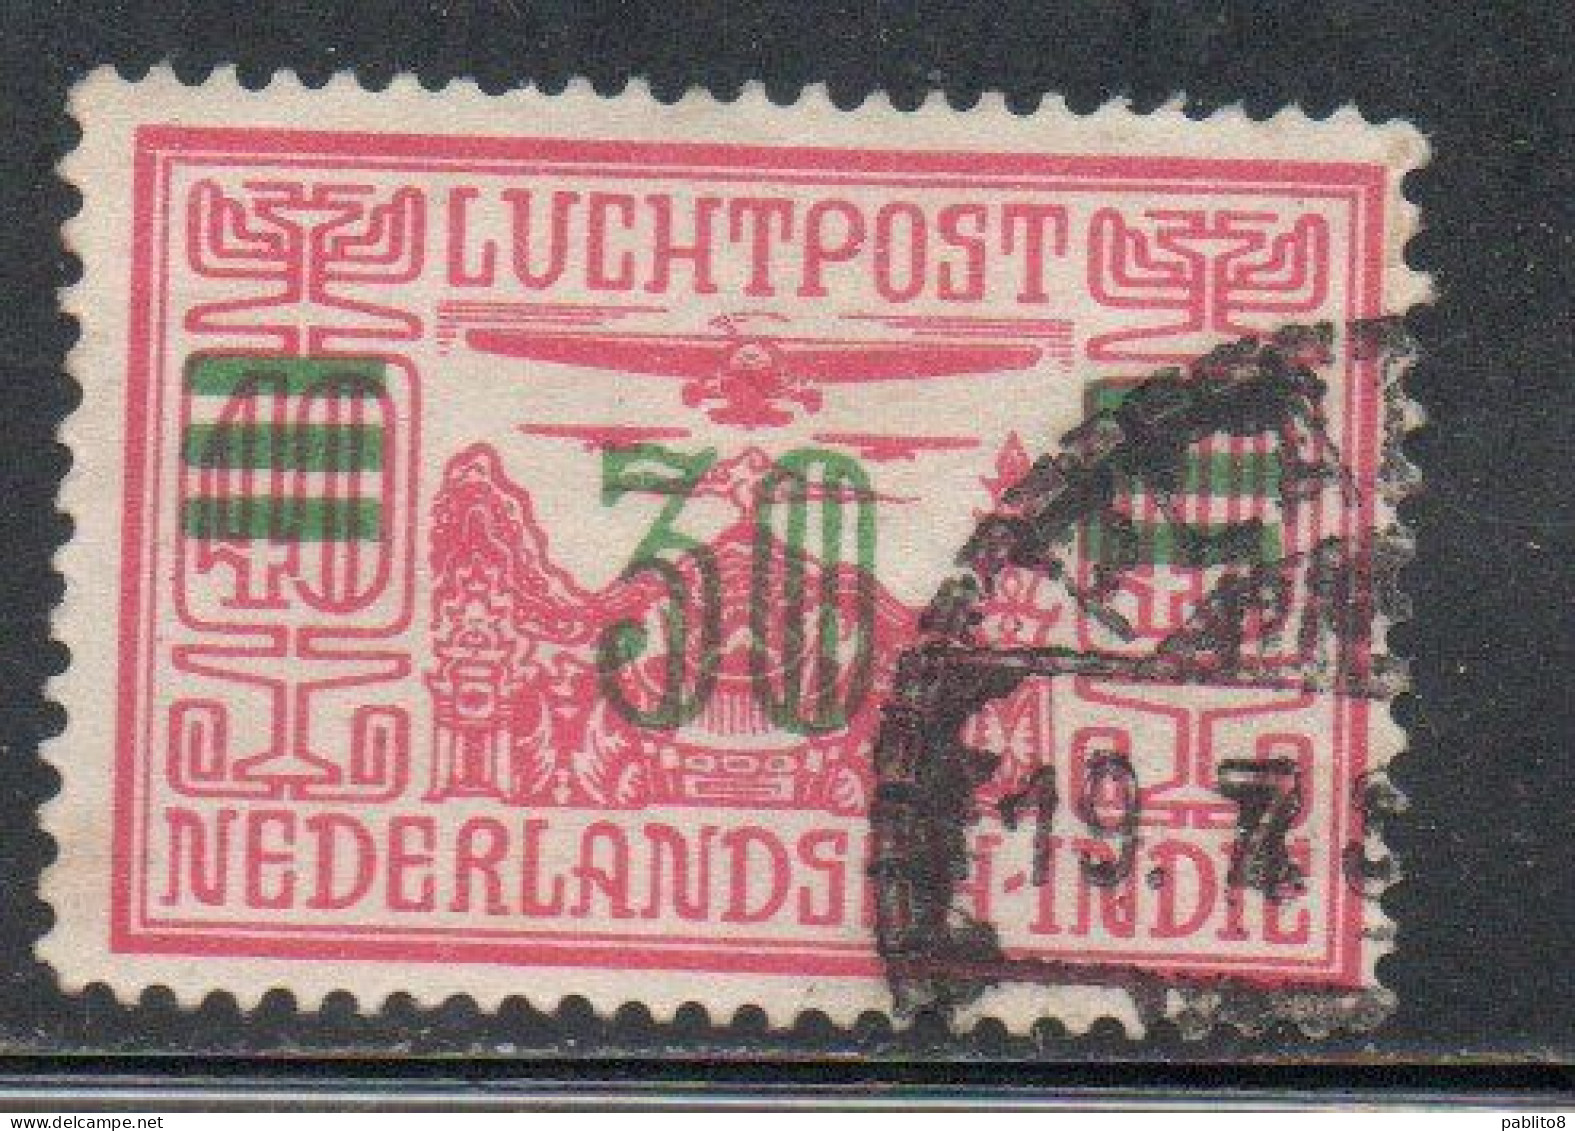 DUTCH INDIA INDIE INDE NEDERLANDS HOLLAND OLANDESE OLANDESI INDIES 1930 1932 AIRMAIL AIR MAIL SURCHARGED 30c On 40c USED - Nederlands-Indië